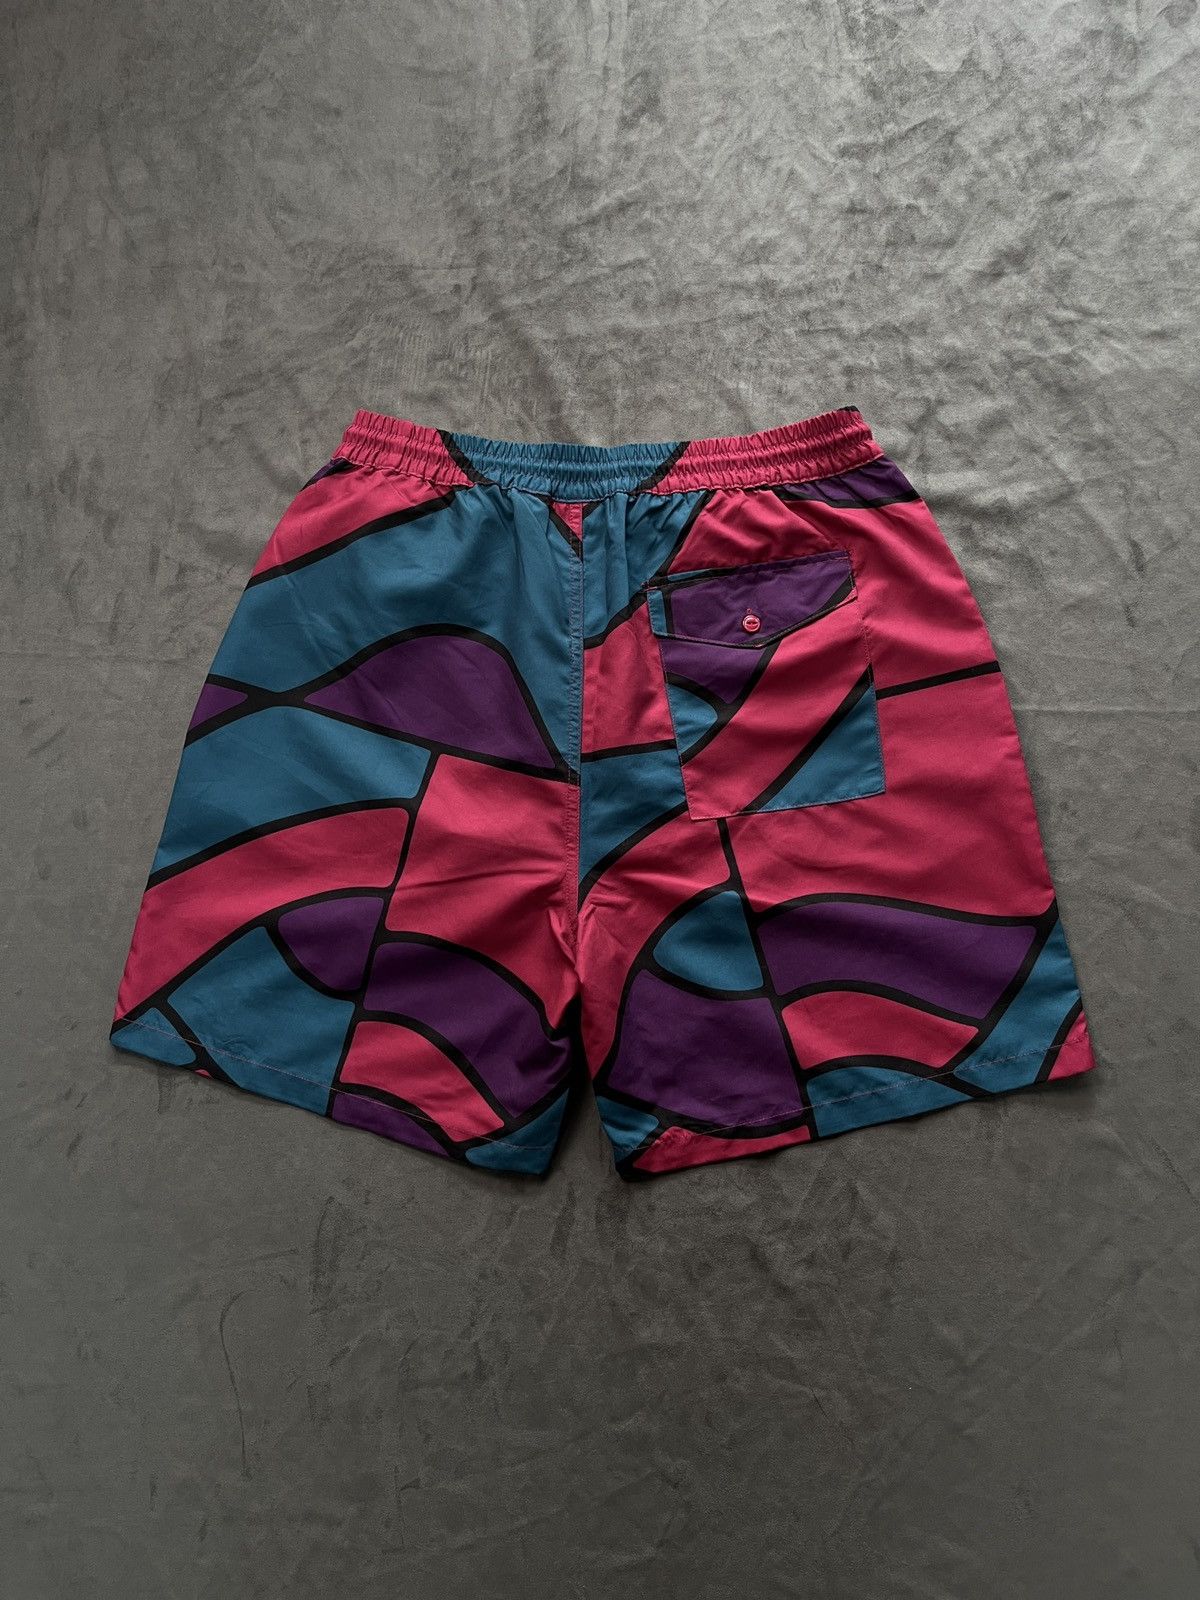 Hype - Deadstock By Parra Mountain Waves Shorts Multi Large - 9